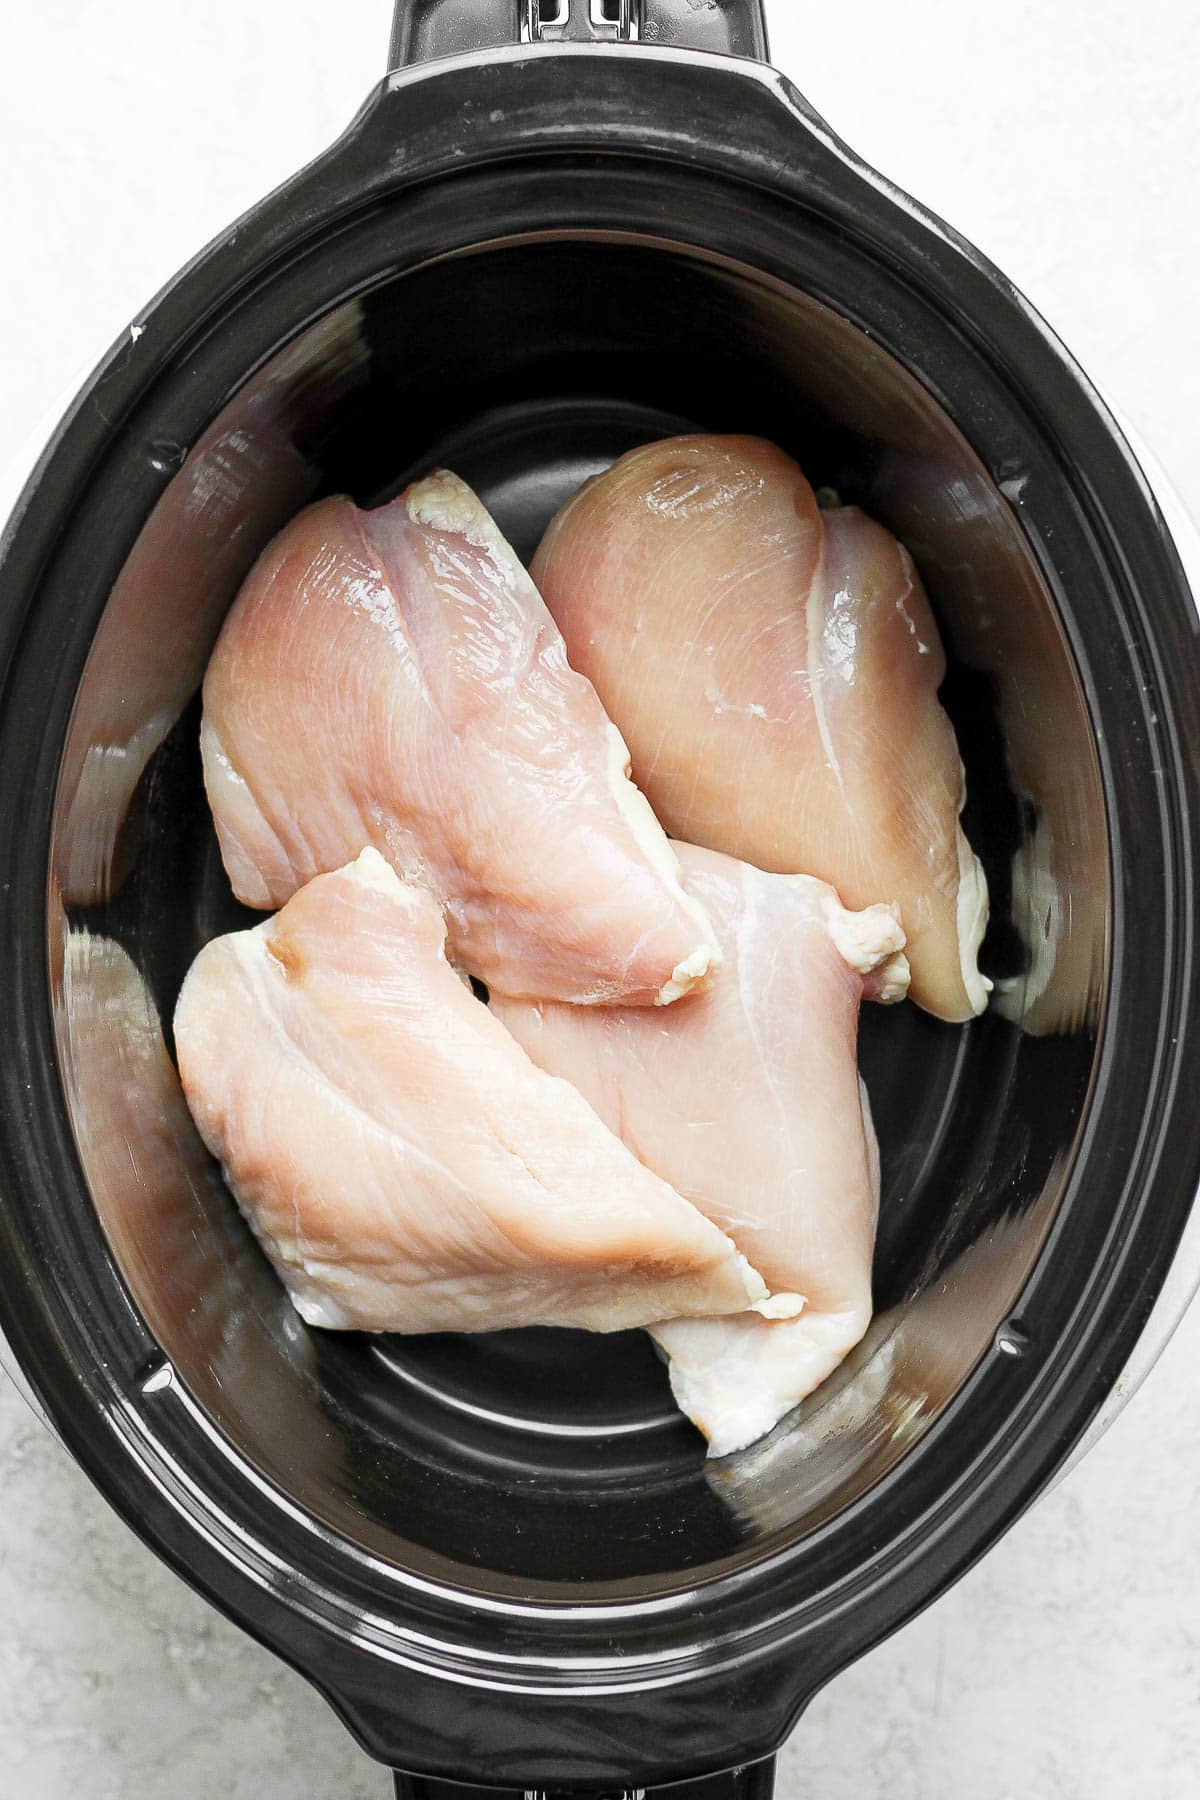 4 raw chicken breasts in a slow cooker.